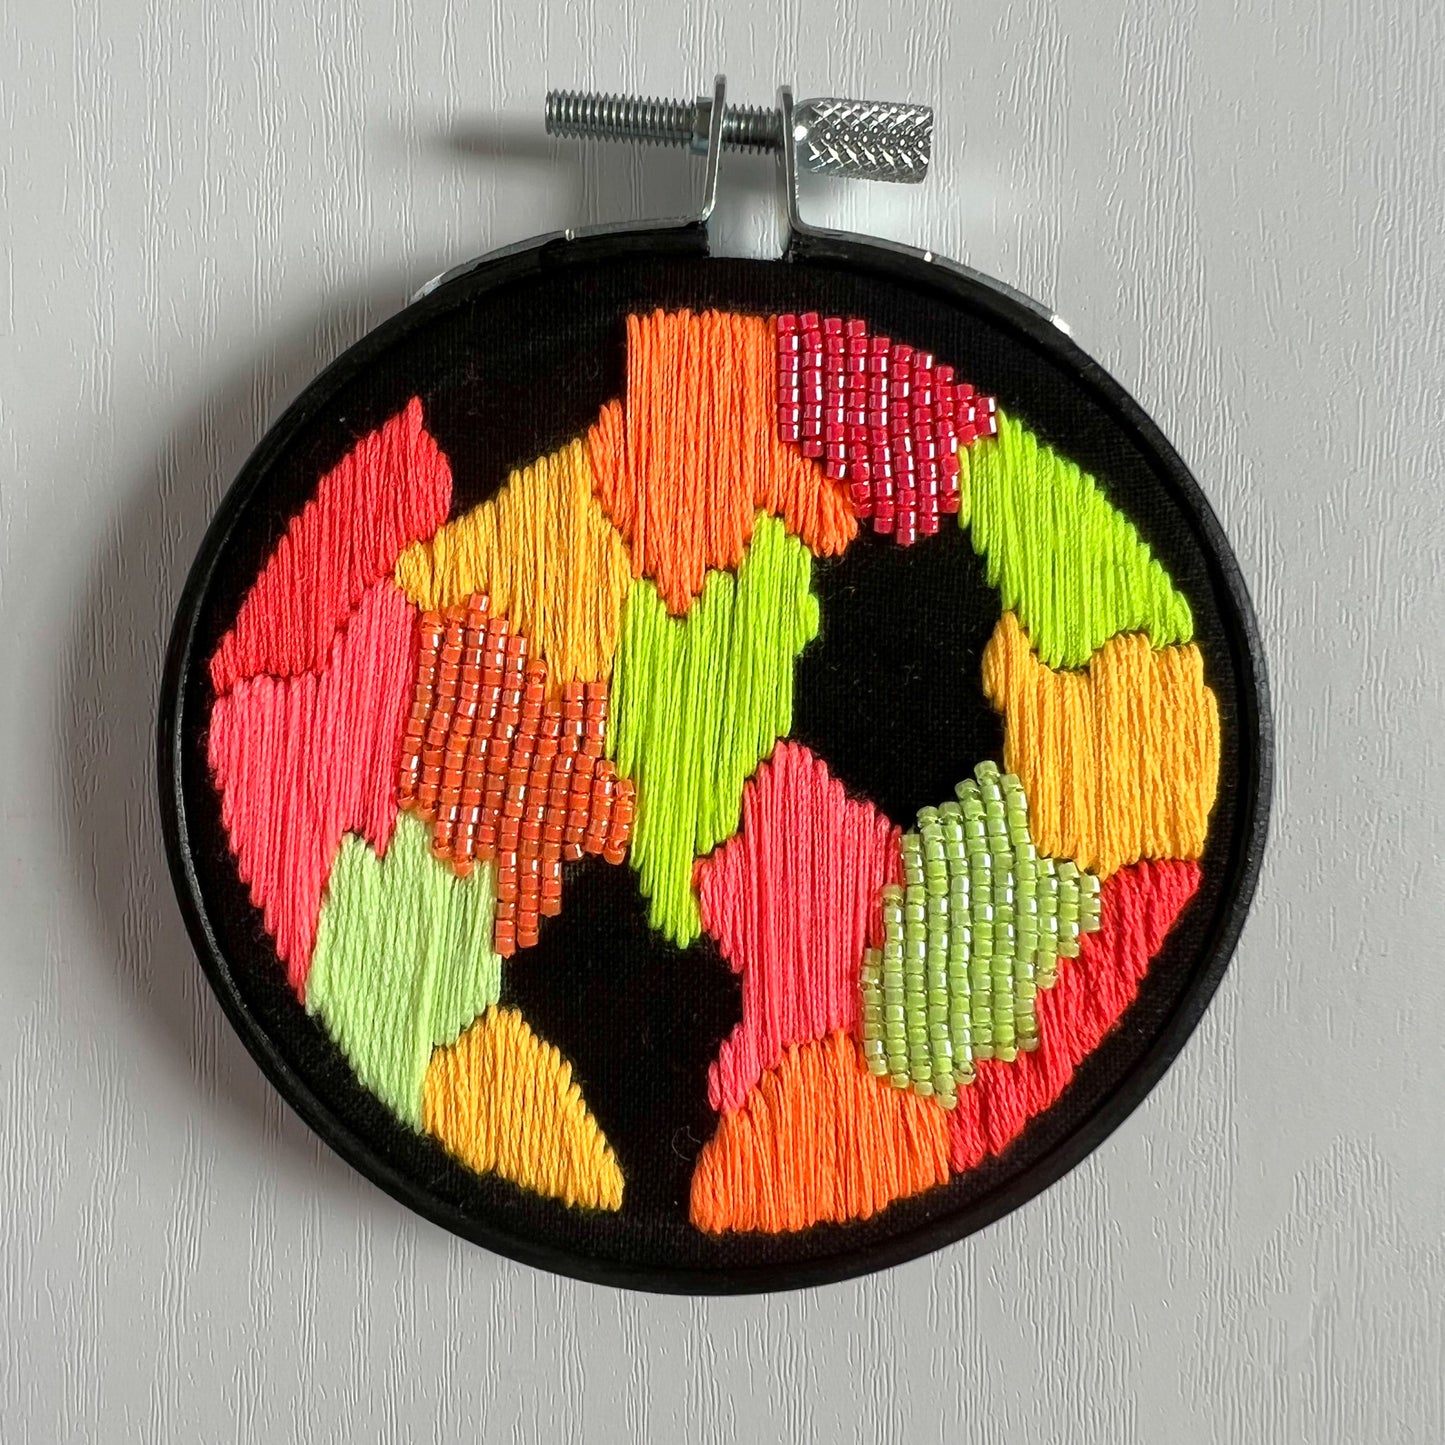 Mini Patchwork Hoops - Embroidery